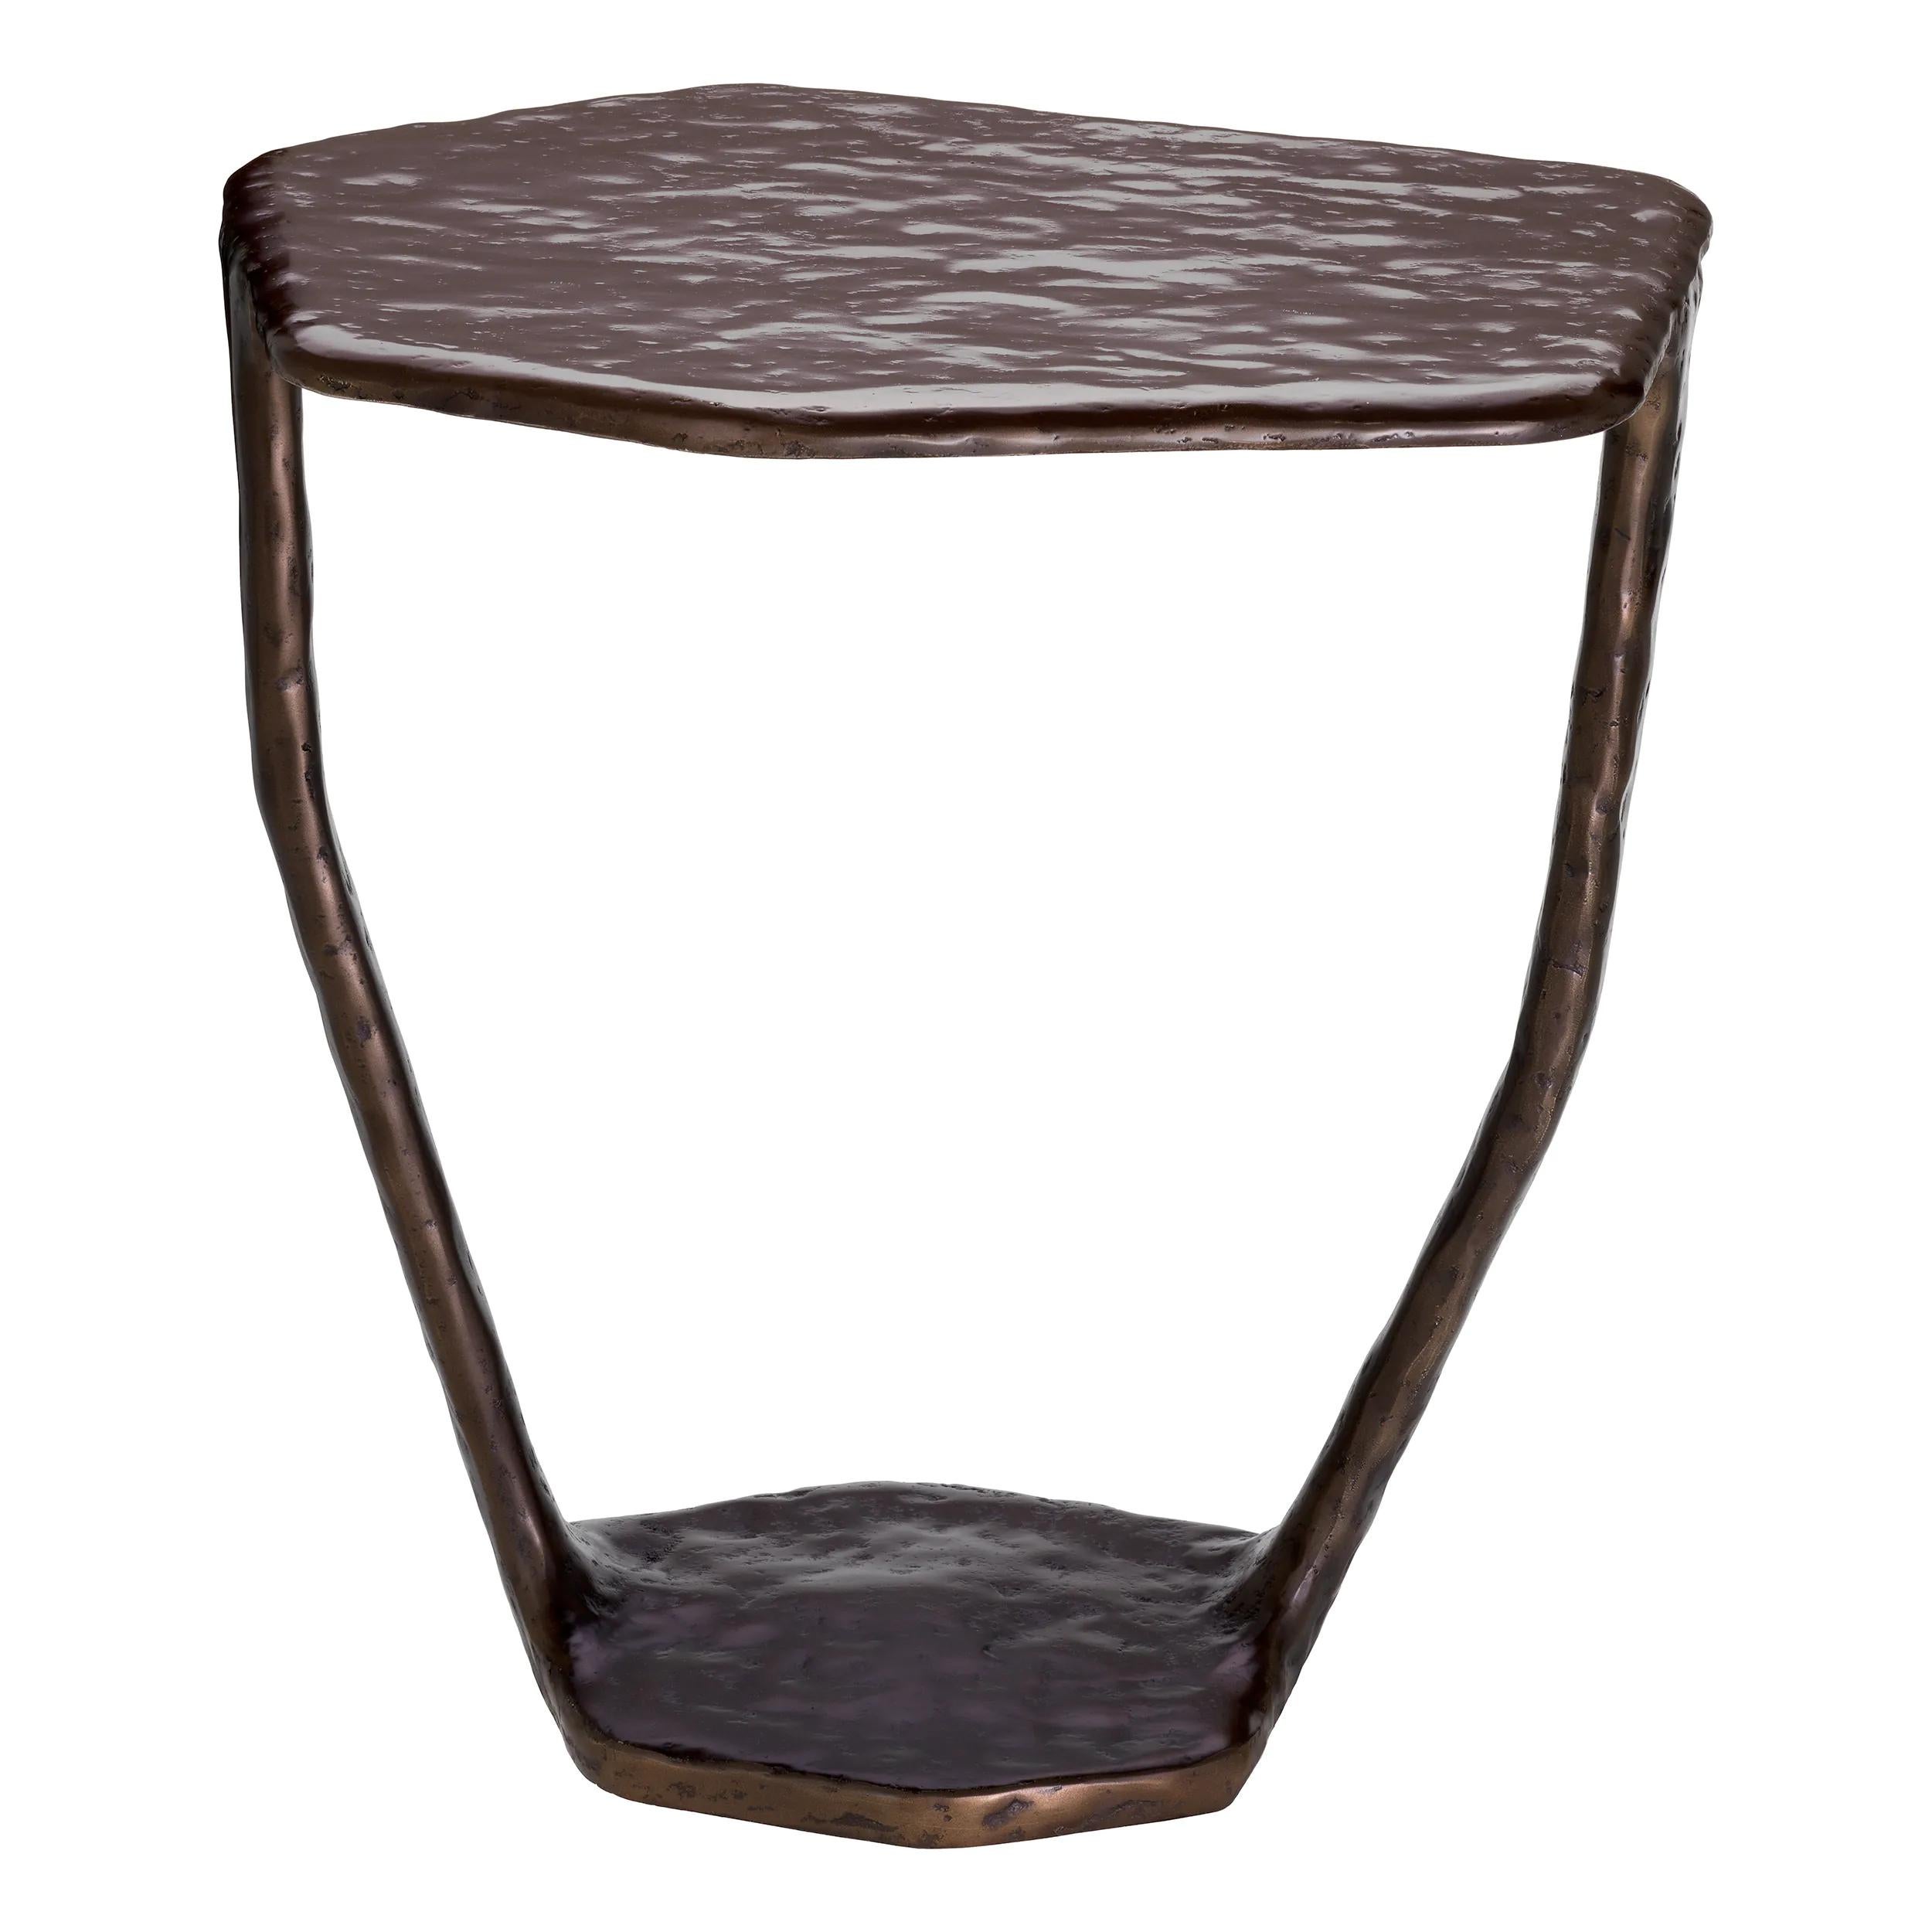 Modern brustalist style dark bronze cast aluminium side table. The perfect organic decorative accent piece, side table or set of end tables.